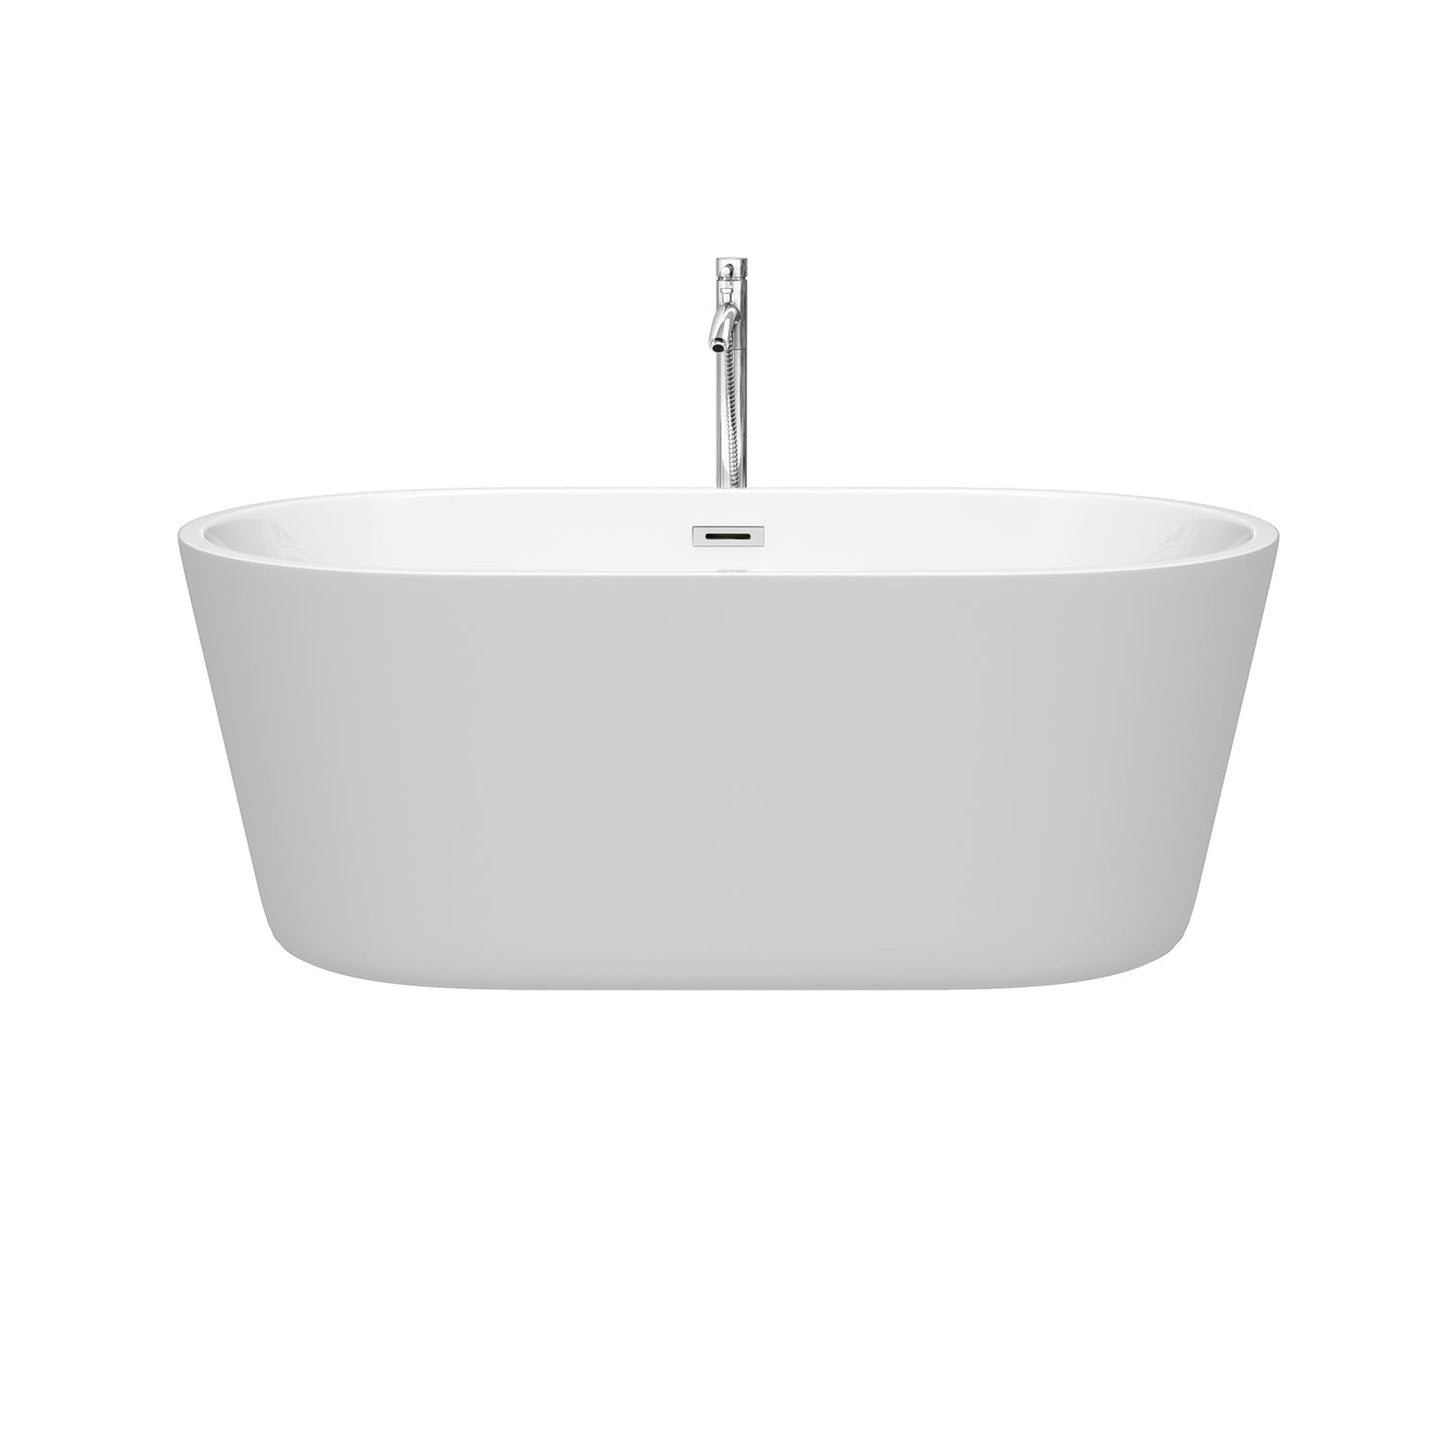 Wyndham Collection Carissa 60" Freestanding Bathtub in White With Floor Mounted Faucet, Drain and Overflow Trim in Polished Chrome